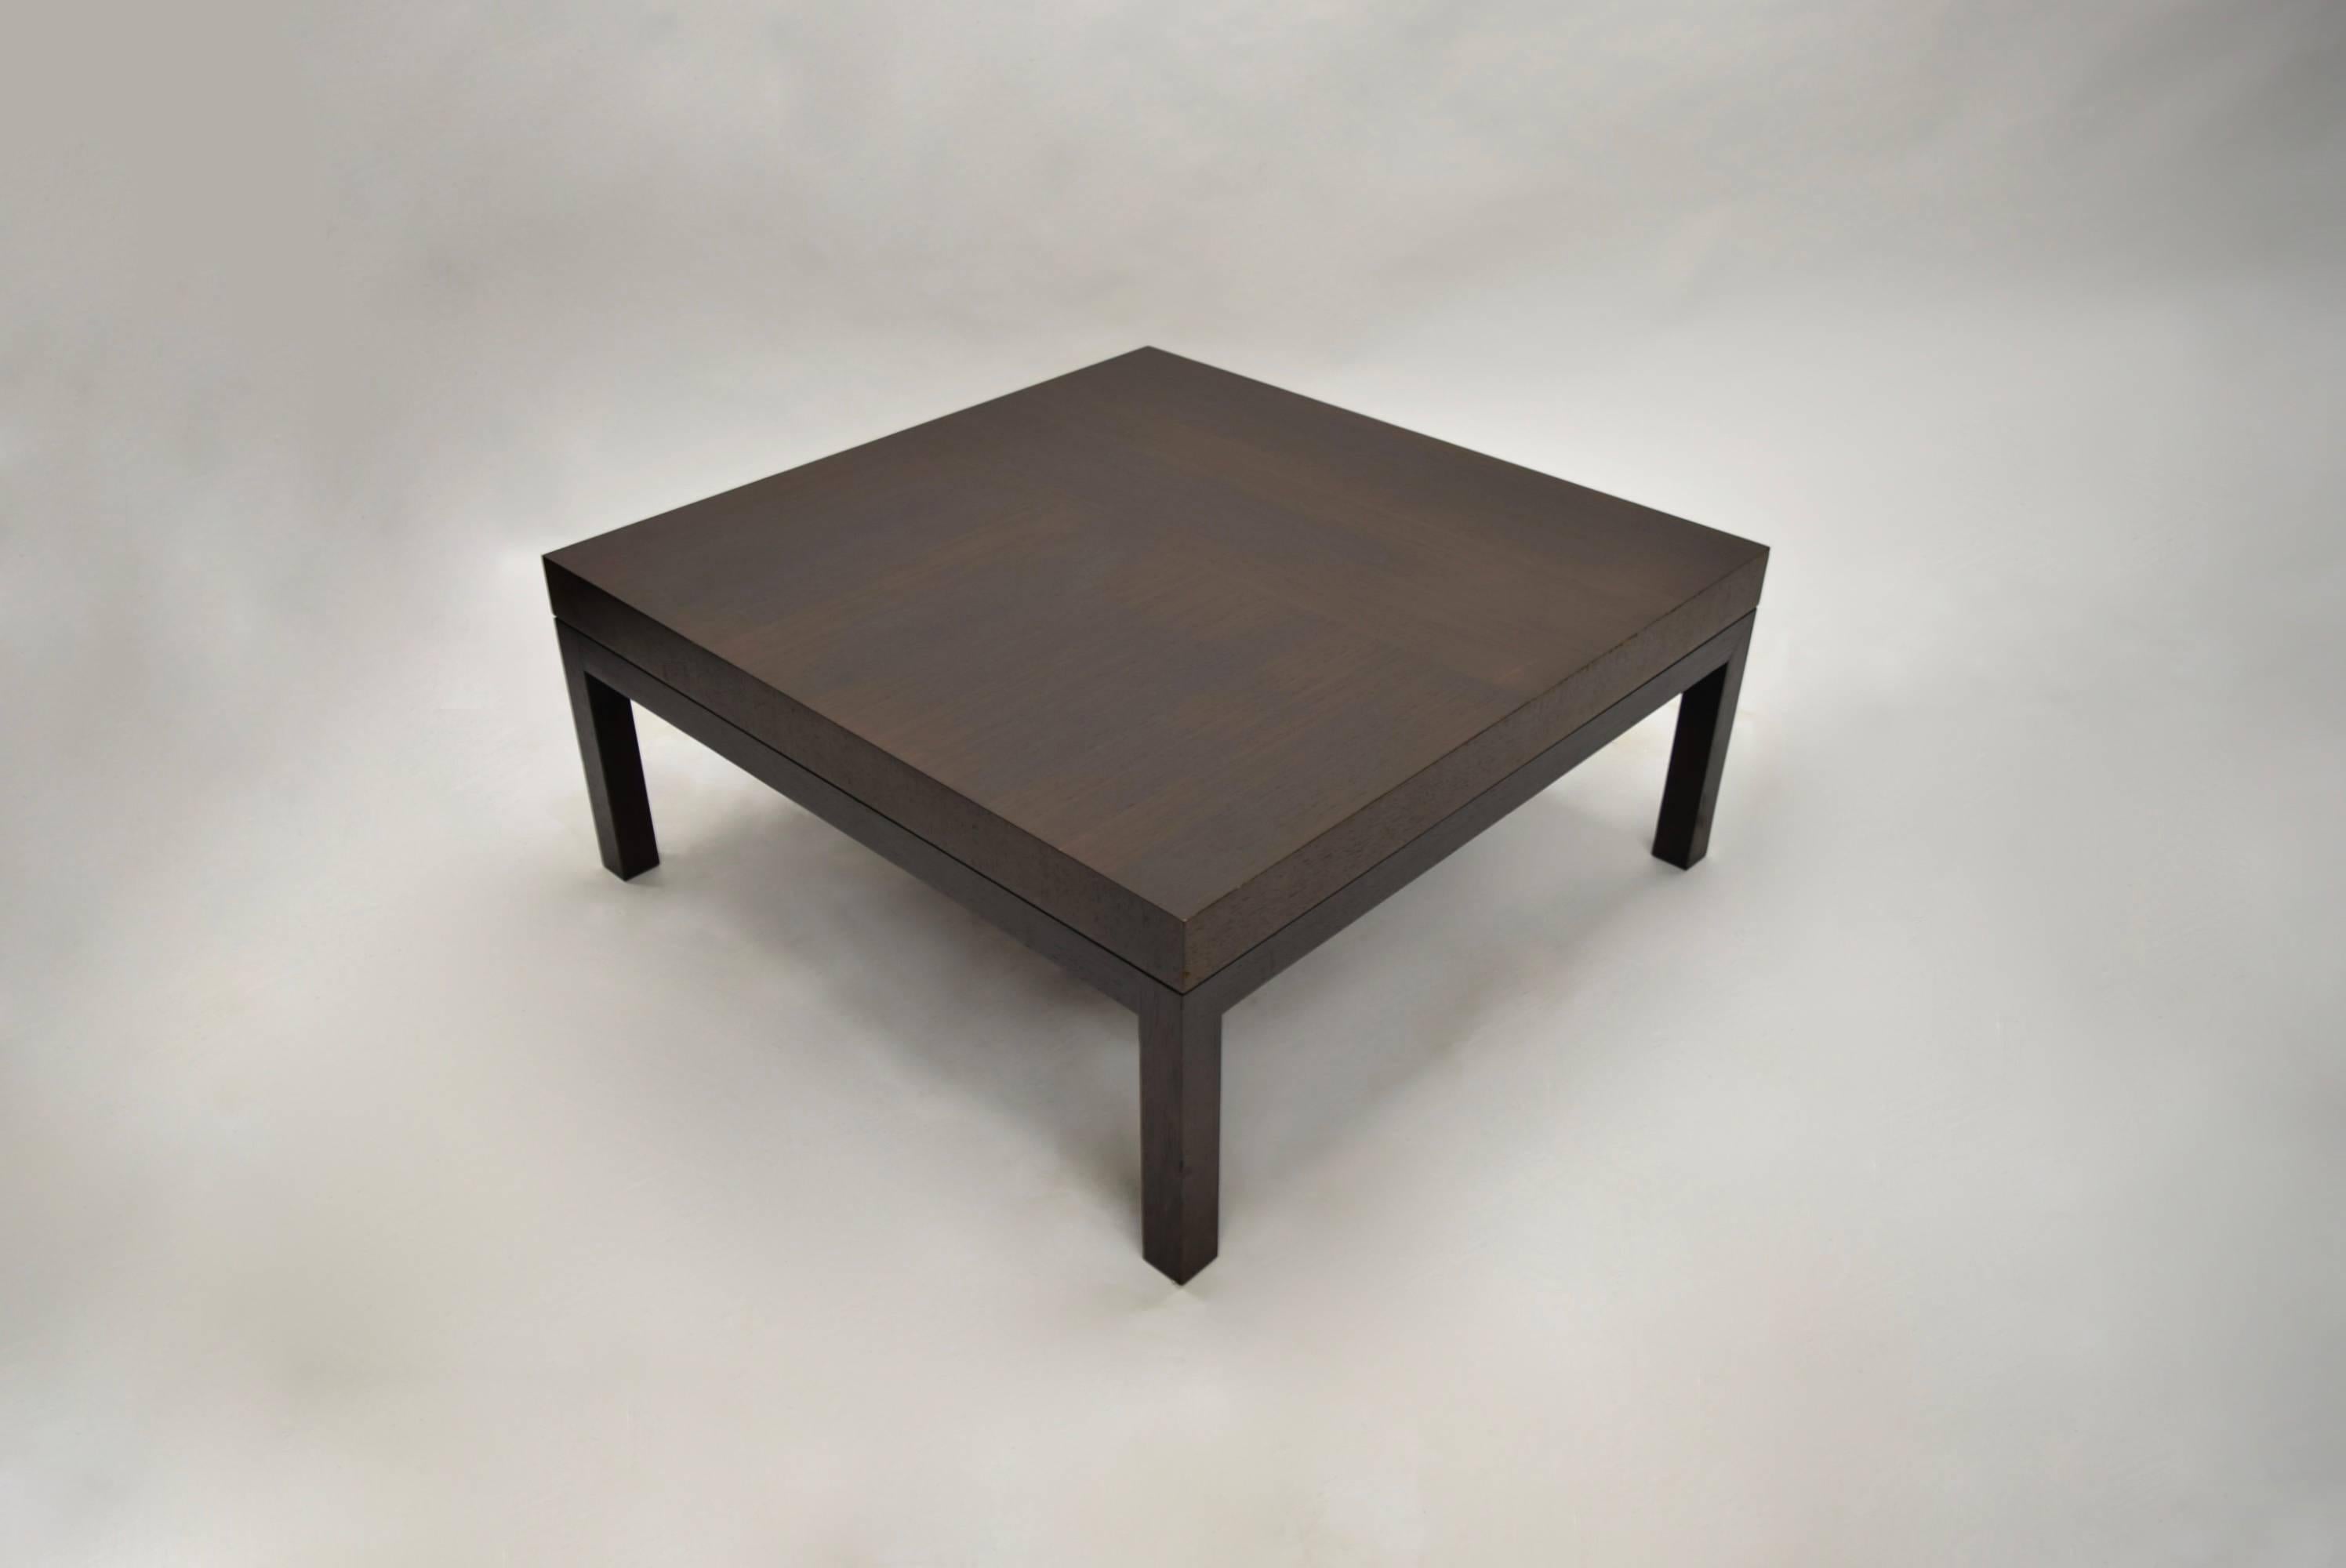 Both tables have a dark brown stained oak tops supported by four leg platform base in black stained oak.